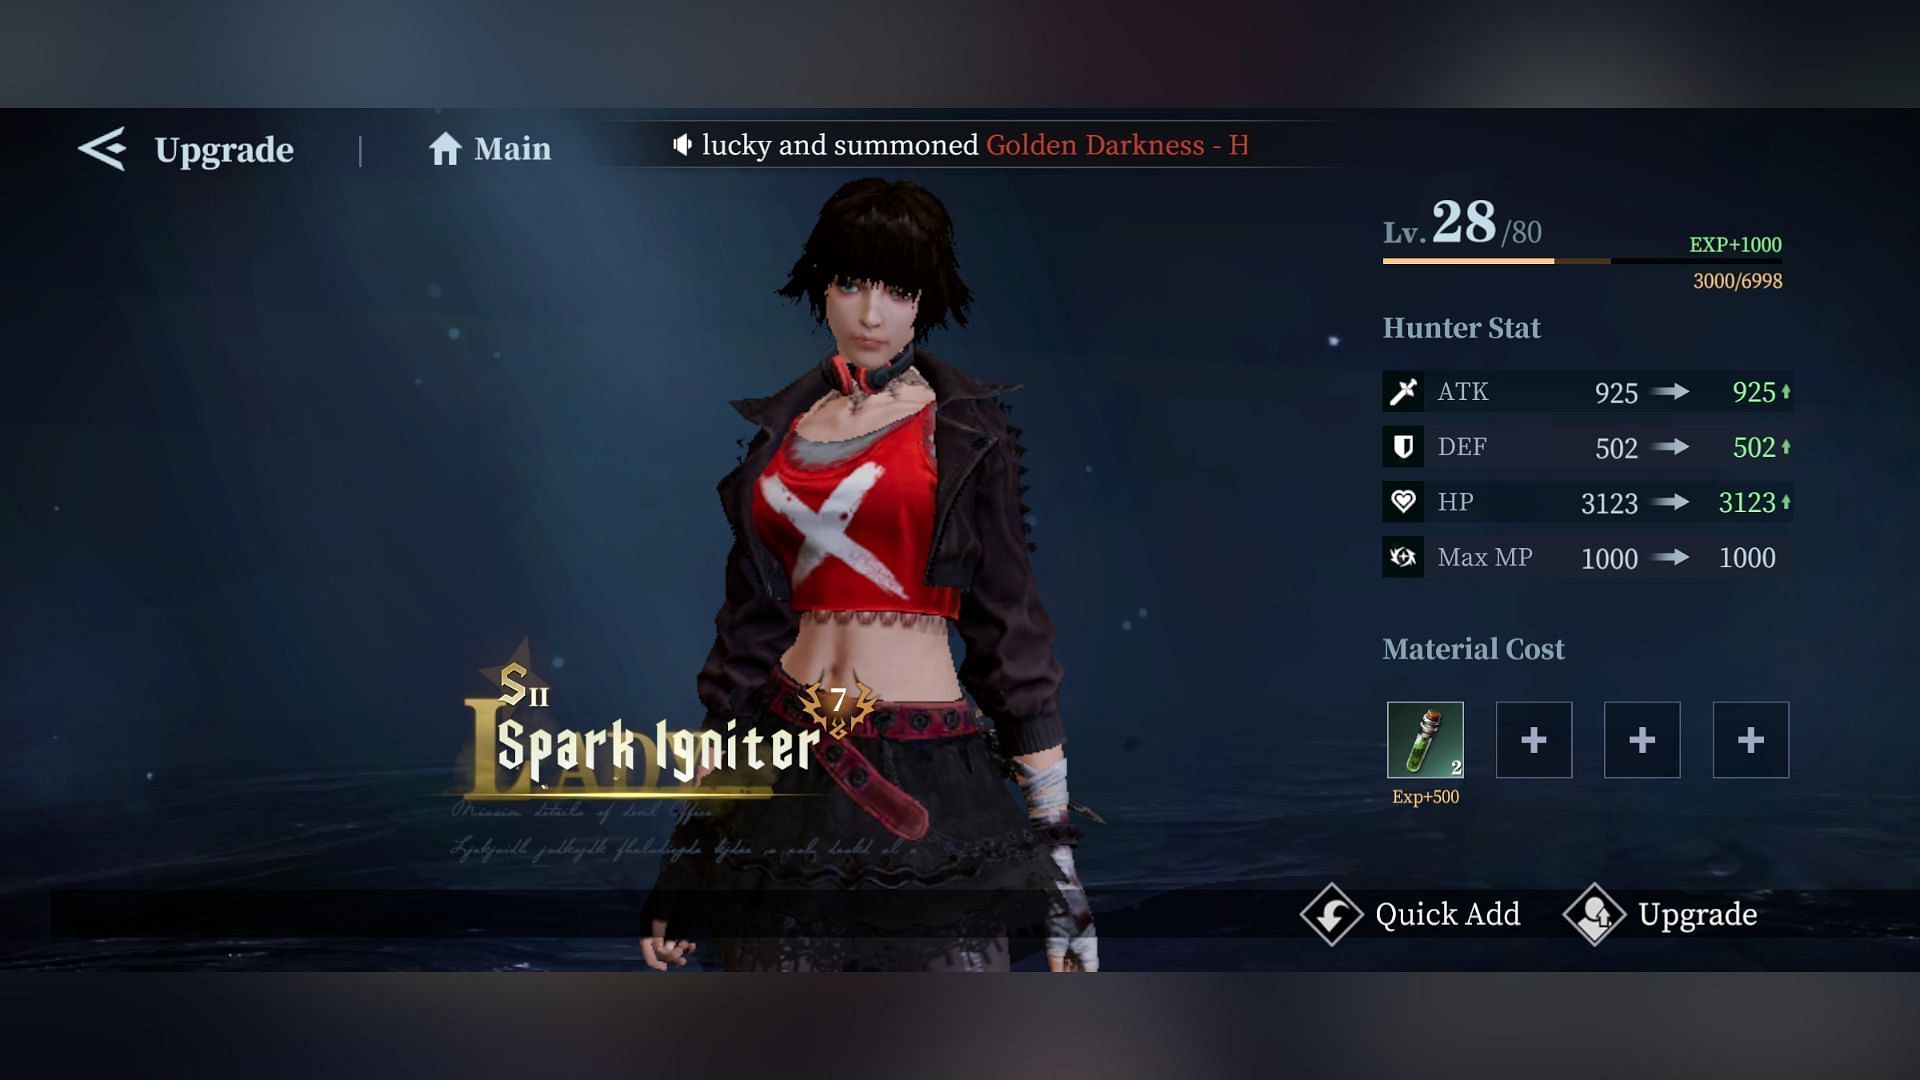 Upgrading Hunters and weapons makes in-game progression faster for Devil May Cry Peak of Combat beginners. (Image via Nebula Joy)